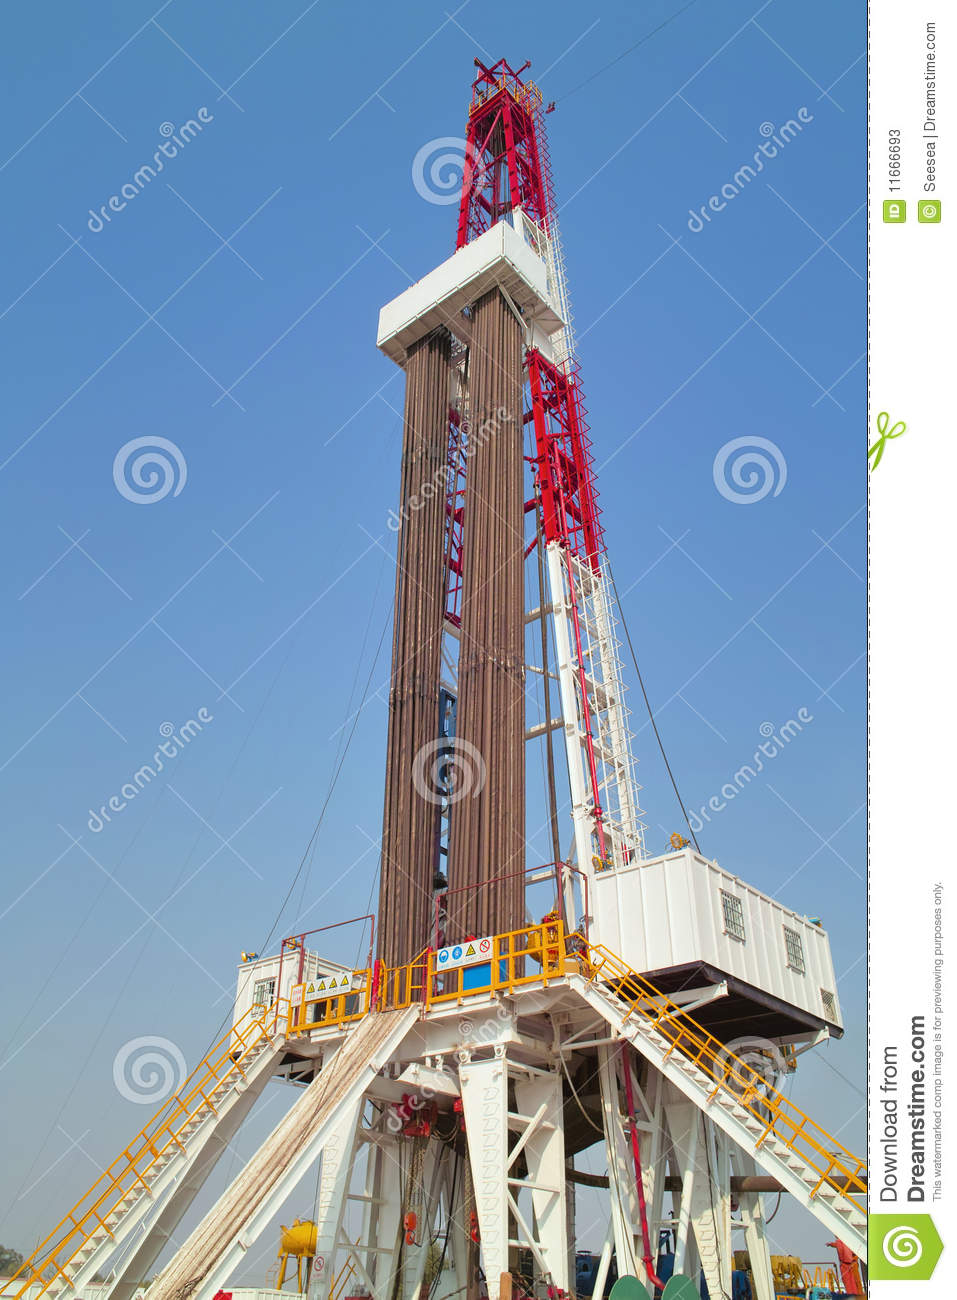 Land Drilling Rig Stock Photos   Image  11666693